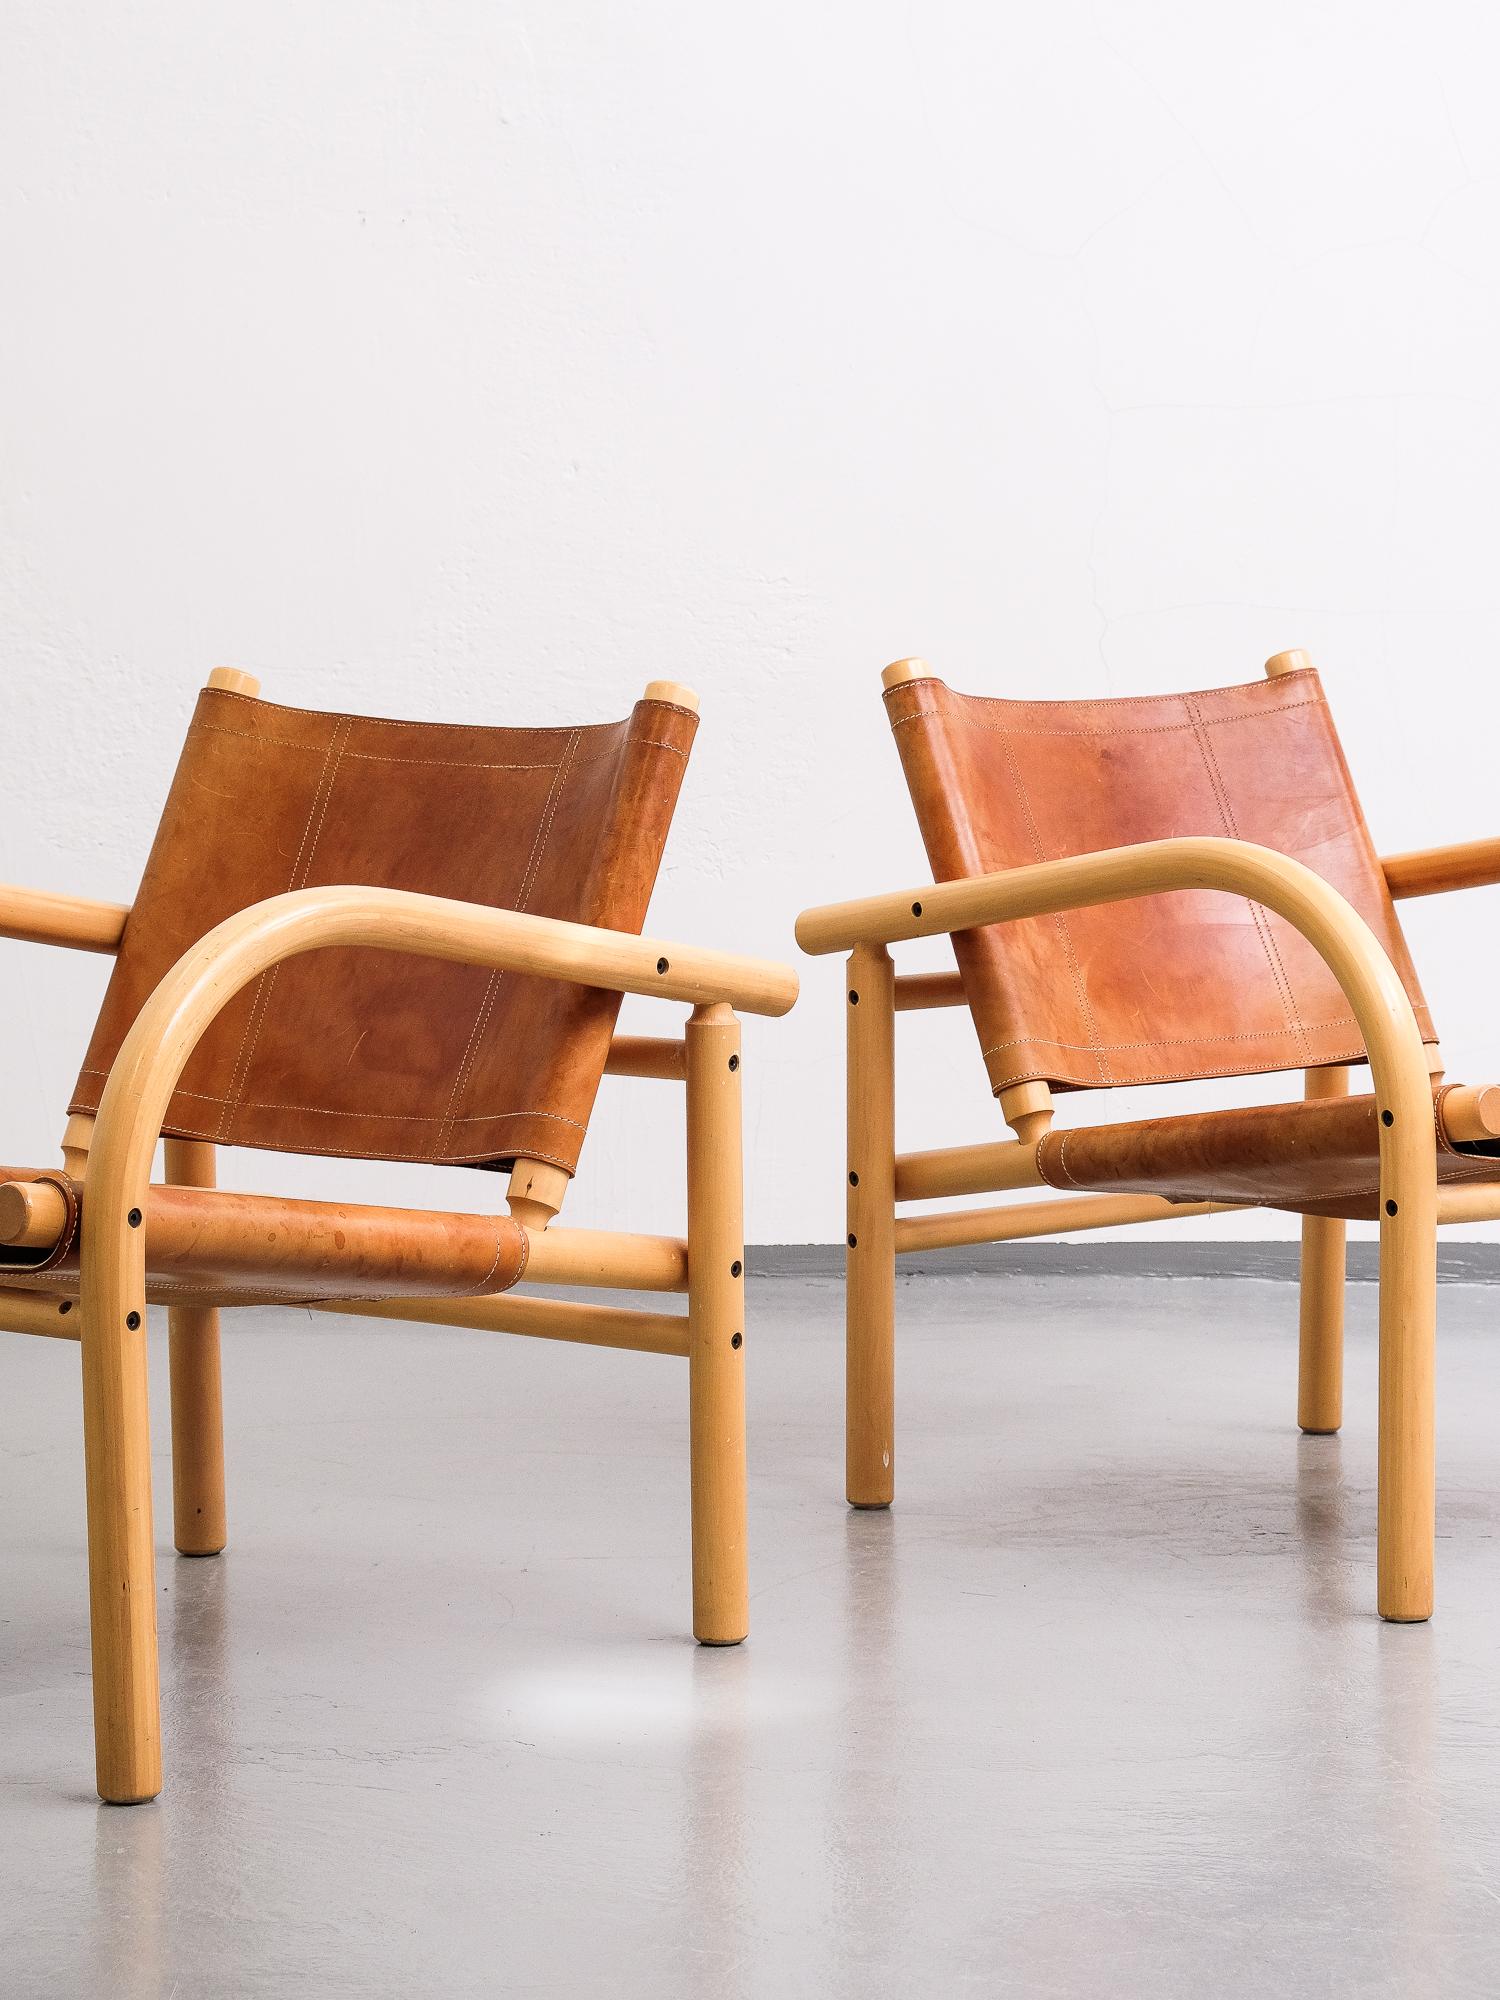 Classic safari chair designed in 1974 by Ben af Schultén for Artek. Birch frame with seat and back in natural leather. This is the bigger lounge chair model.